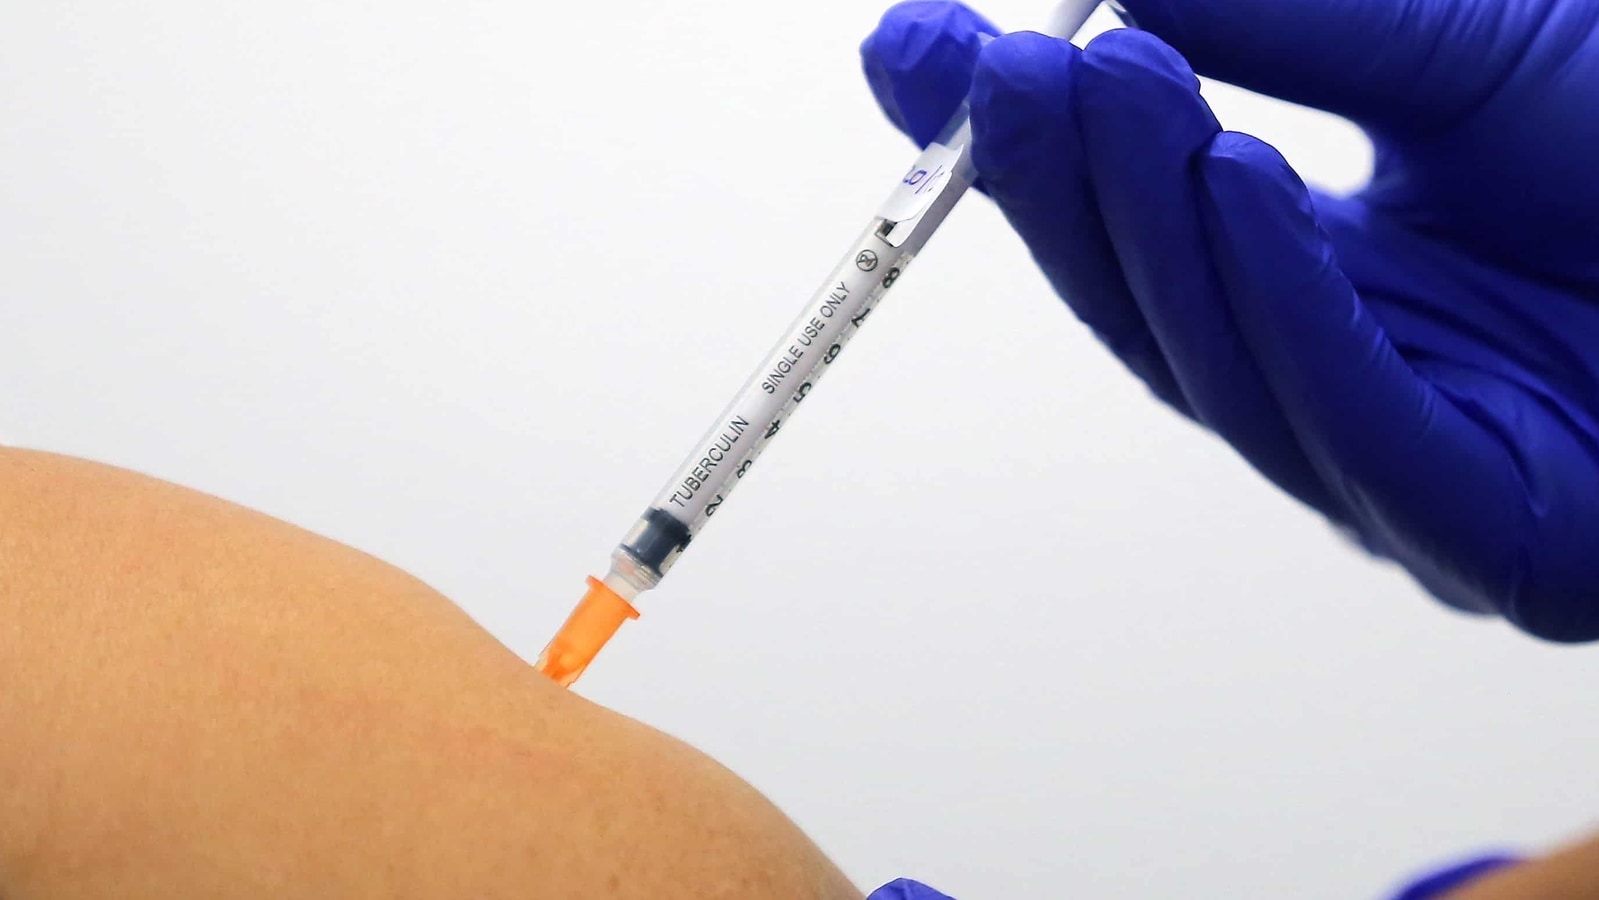 Rapid introduction of Covid-19 vaccine has declined in some US states